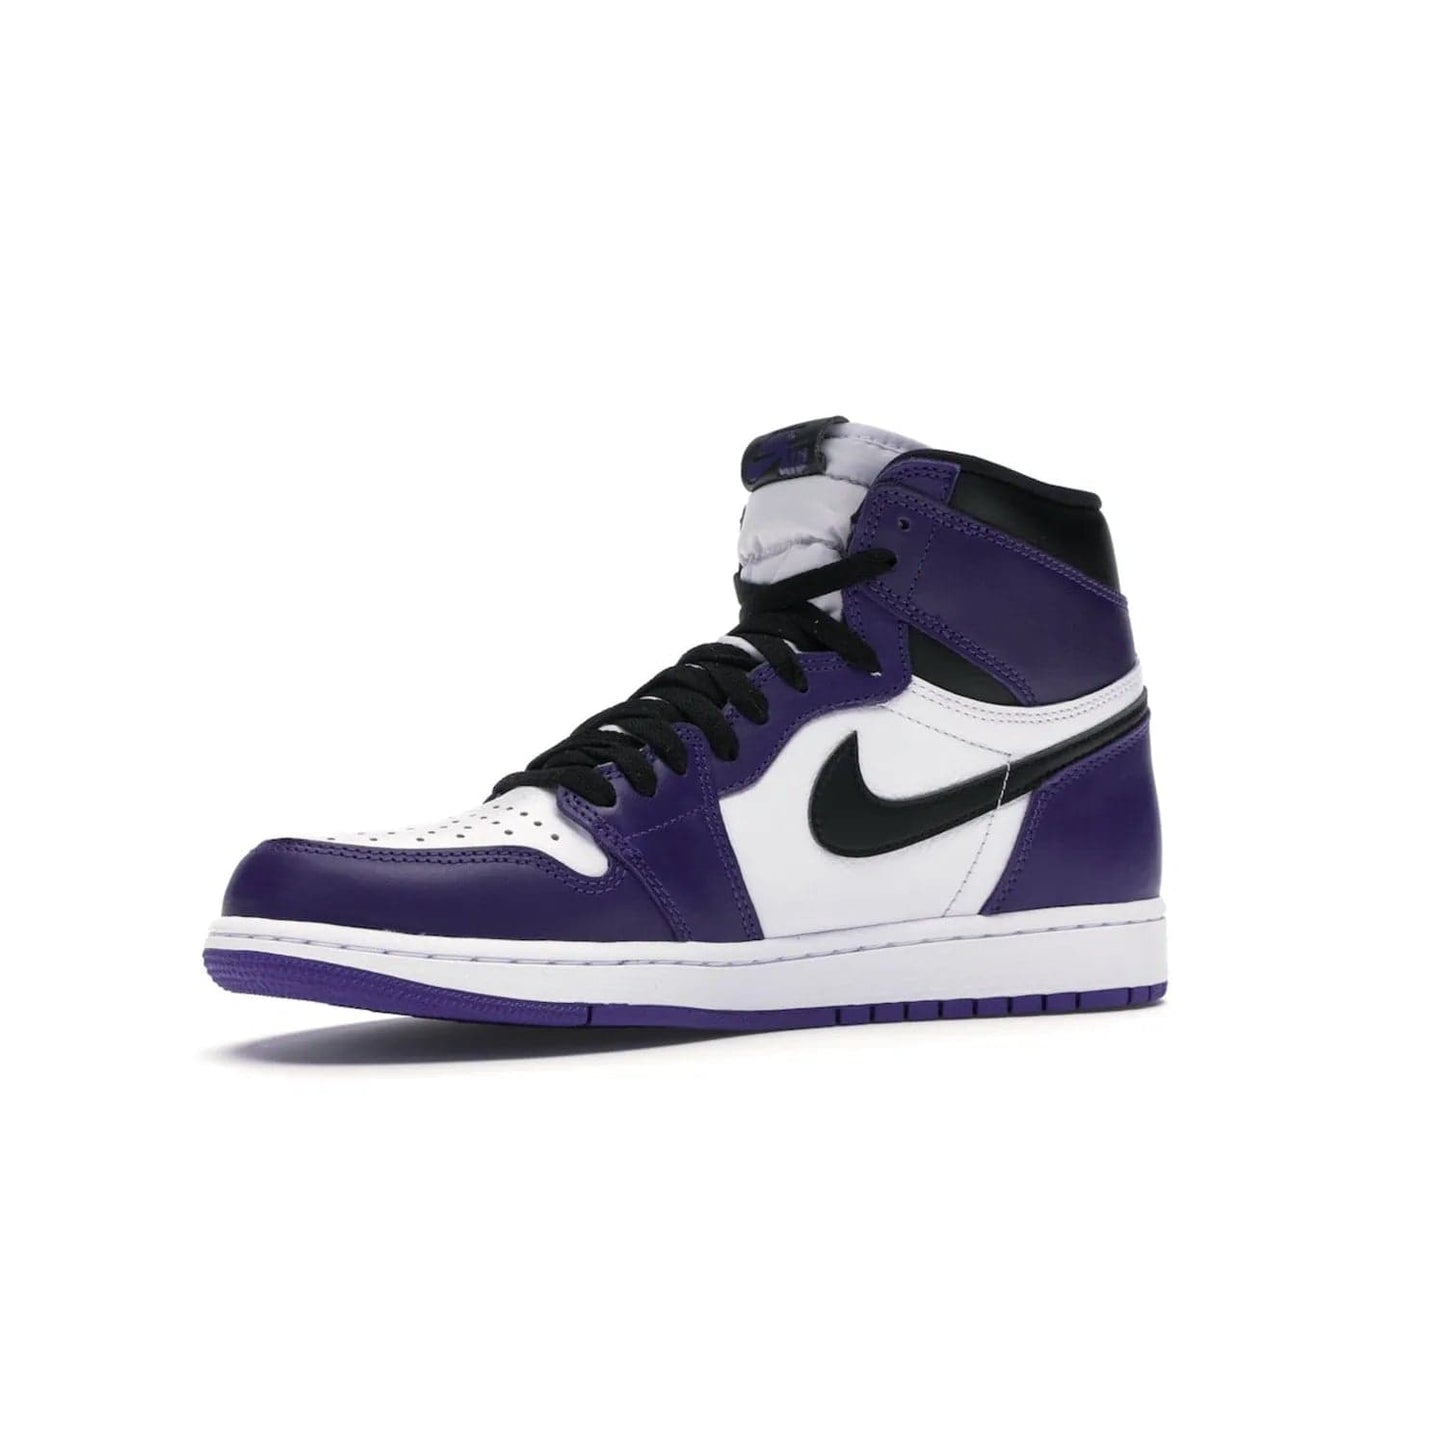 Jordan 1 Retro High Court Purple White - Image 16 - Only at www.BallersClubKickz.com - Grab the classic Jordan 1 Retro High Court Purple White and add major flavor to your collection. White leather upper with Court Purple overlays and Swoosh logo. White midsole and purple outsole. Get yours and rep your Jordan Brand.